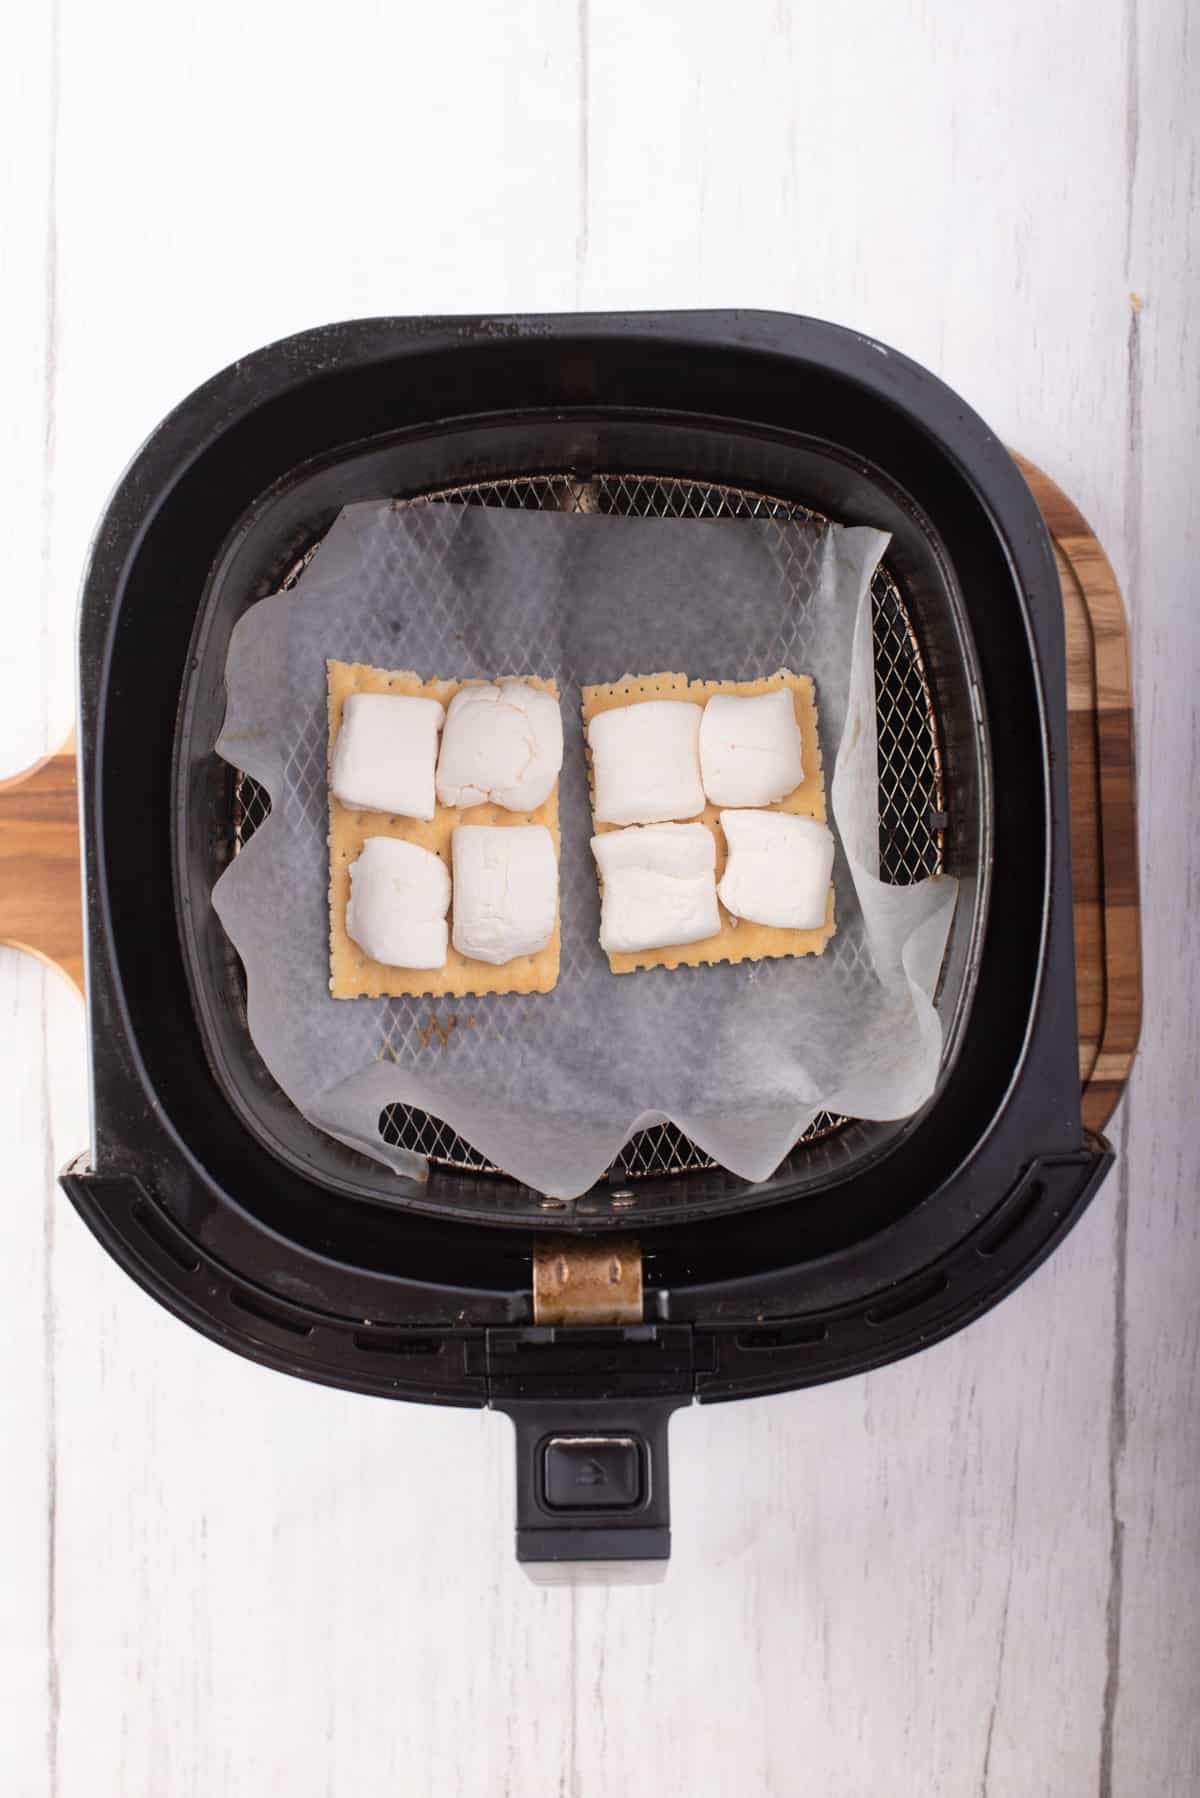 Overhead view of two Graham crackers with marshmallows cut in half on top, placed on the air fryer basket.